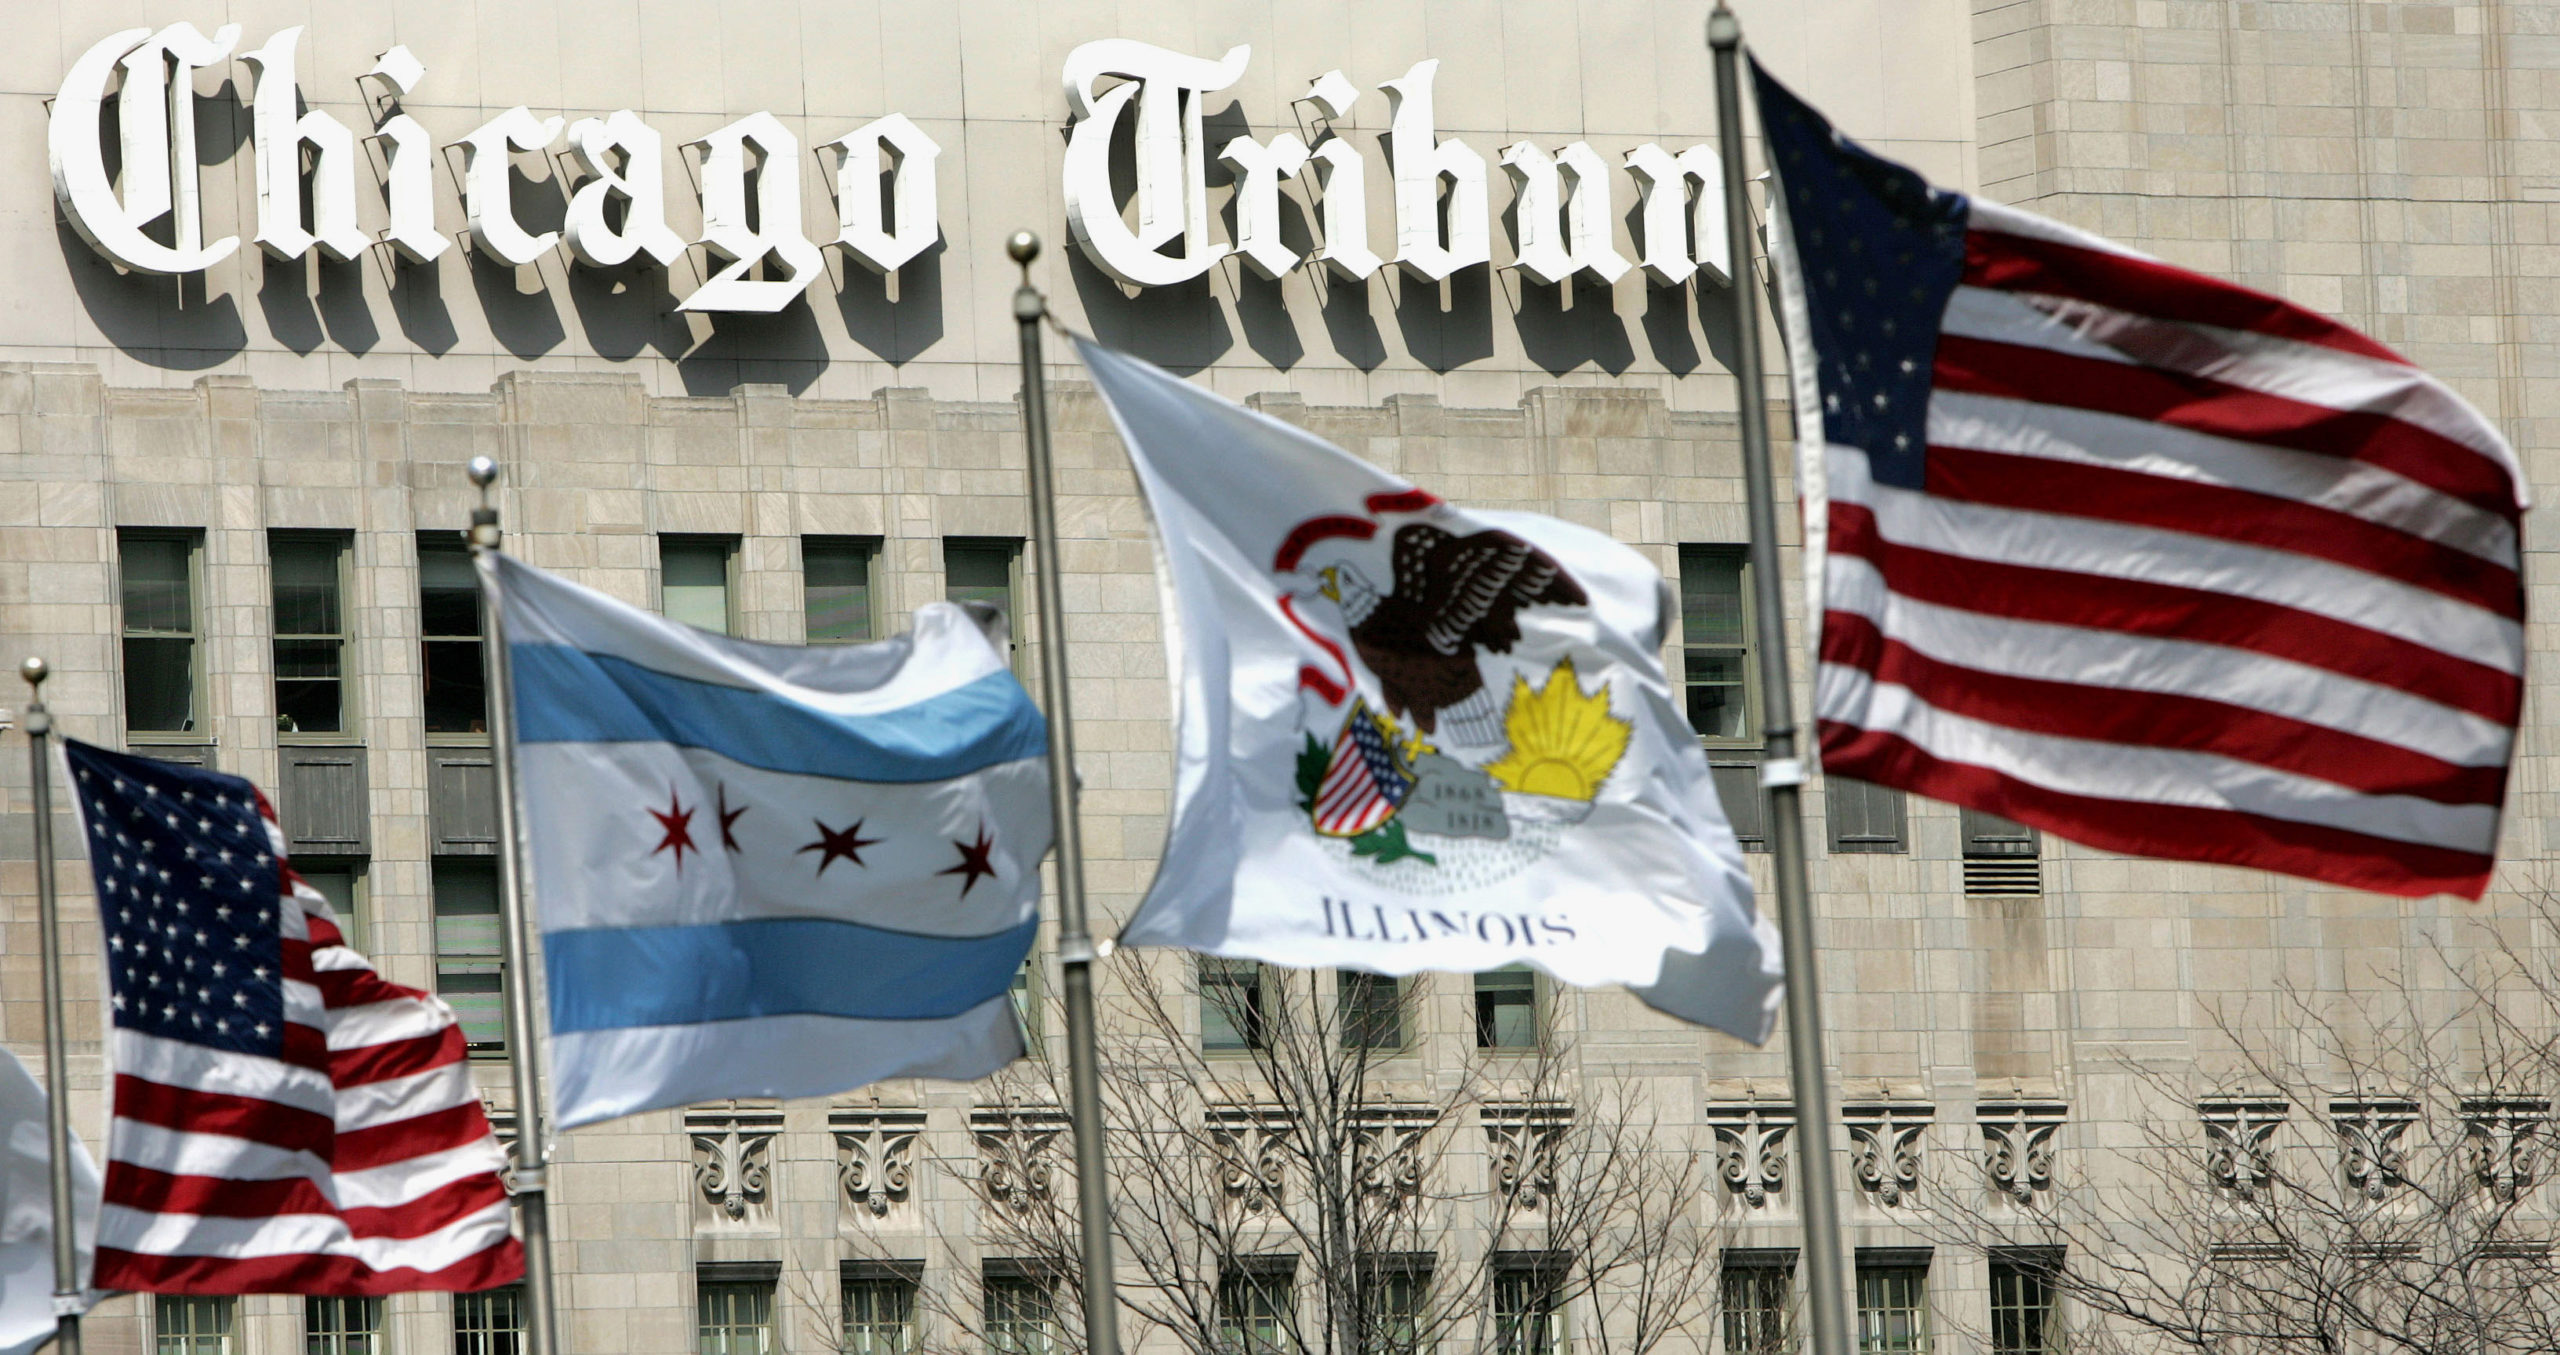 Flags wave near the Chicago Tribune Tower. Newspaper publisher Tribune agreed to be sold to Alden Global Capital, a hedge fund known for cutting costs, in Feb. 2021. As hedge funds slash staff positions, some newsrooms have unionized in response